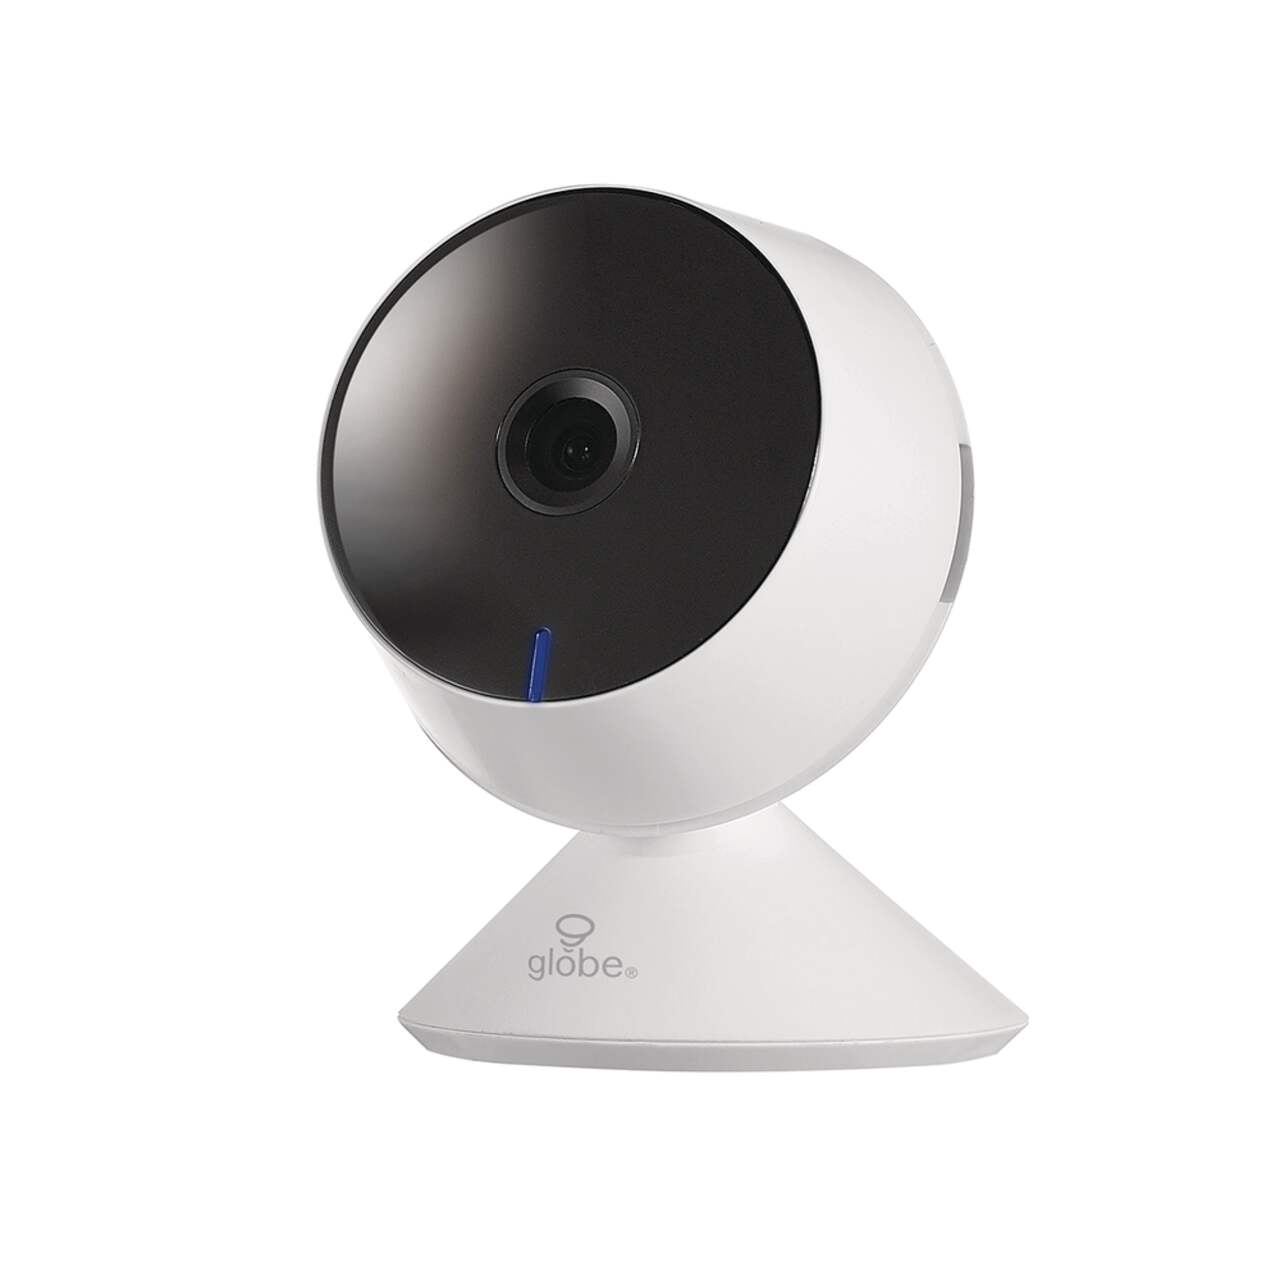 https://media-www.canadiantire.ca/product/fixing/hardware/home-safety/0463402/globe-indoor-1080p-camera-2e4f8f04-5d95-4167-812f-bcfc4b2376dc.png?imdensity=1&imwidth=640&impolicy=mZoom